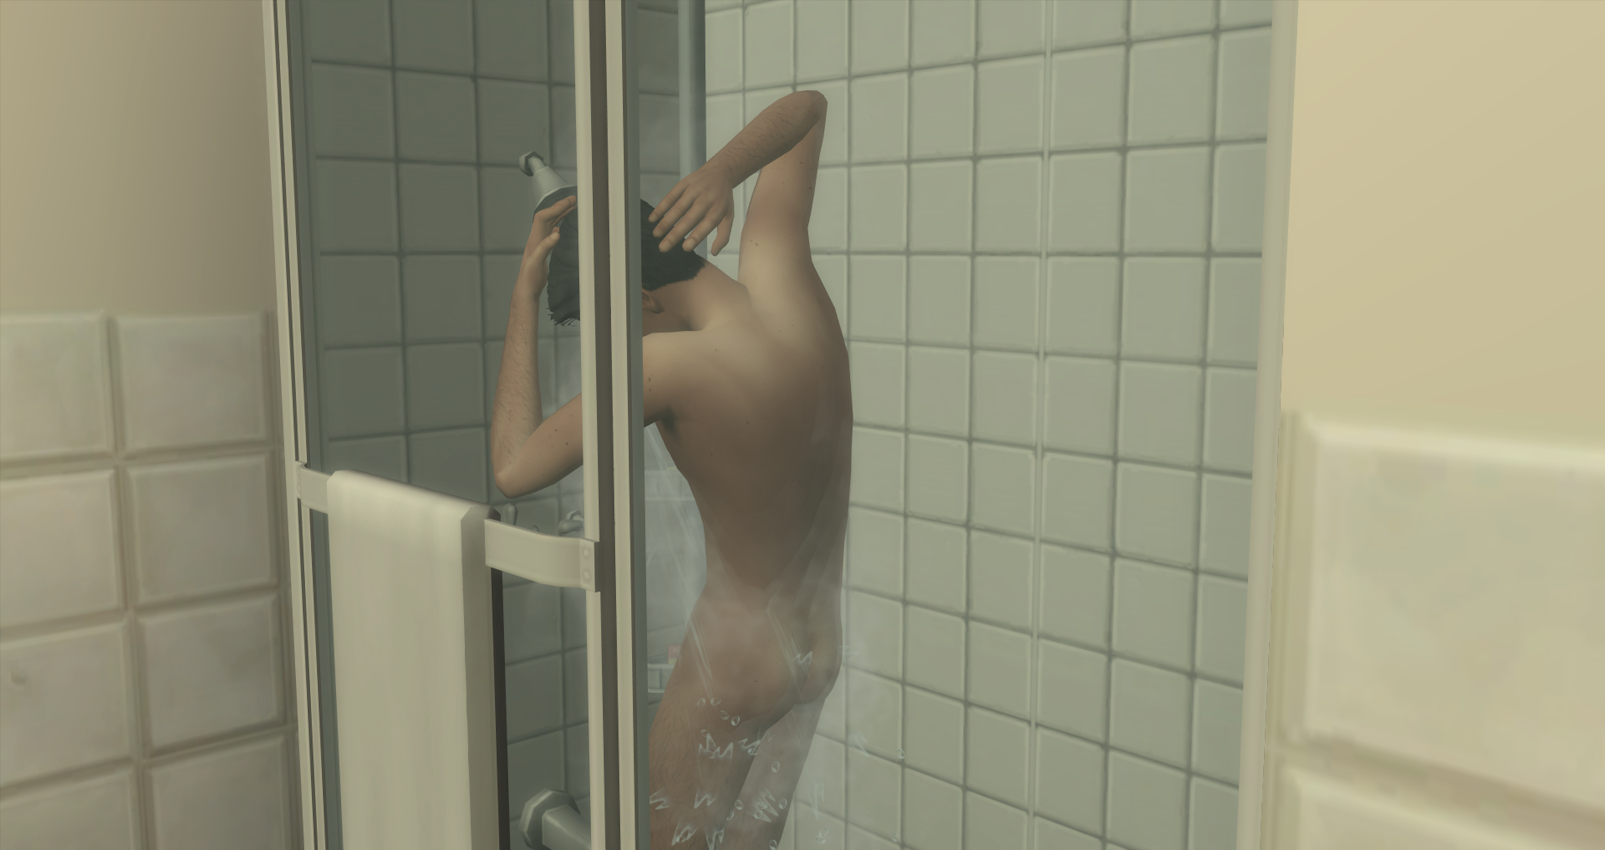 012Showertime.png.84bfe8cd582fa8dcec460a9e9fe94d98.png